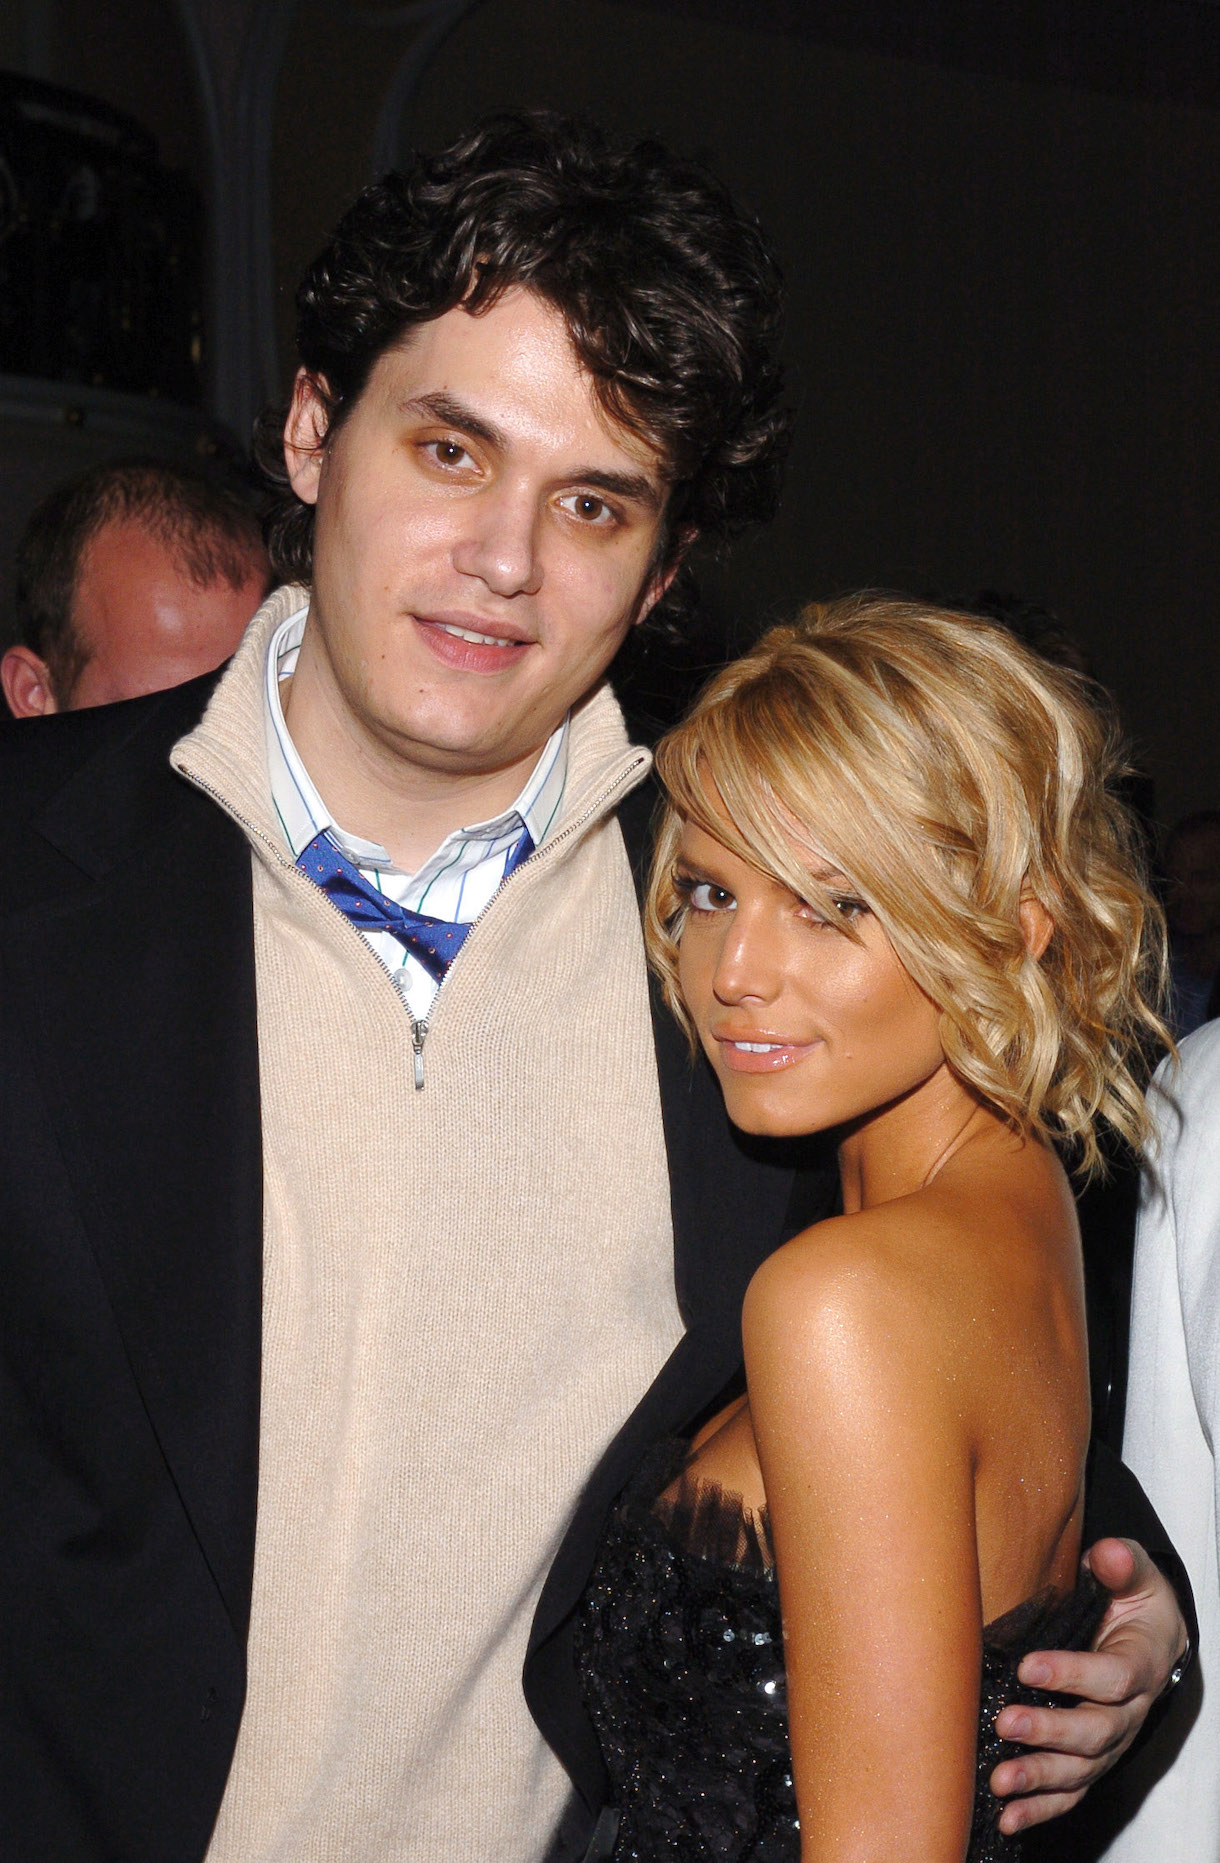 John Mayer and Jessica Simpson during Clive Davis' 2005 Pre-GRAMMY Awards Party